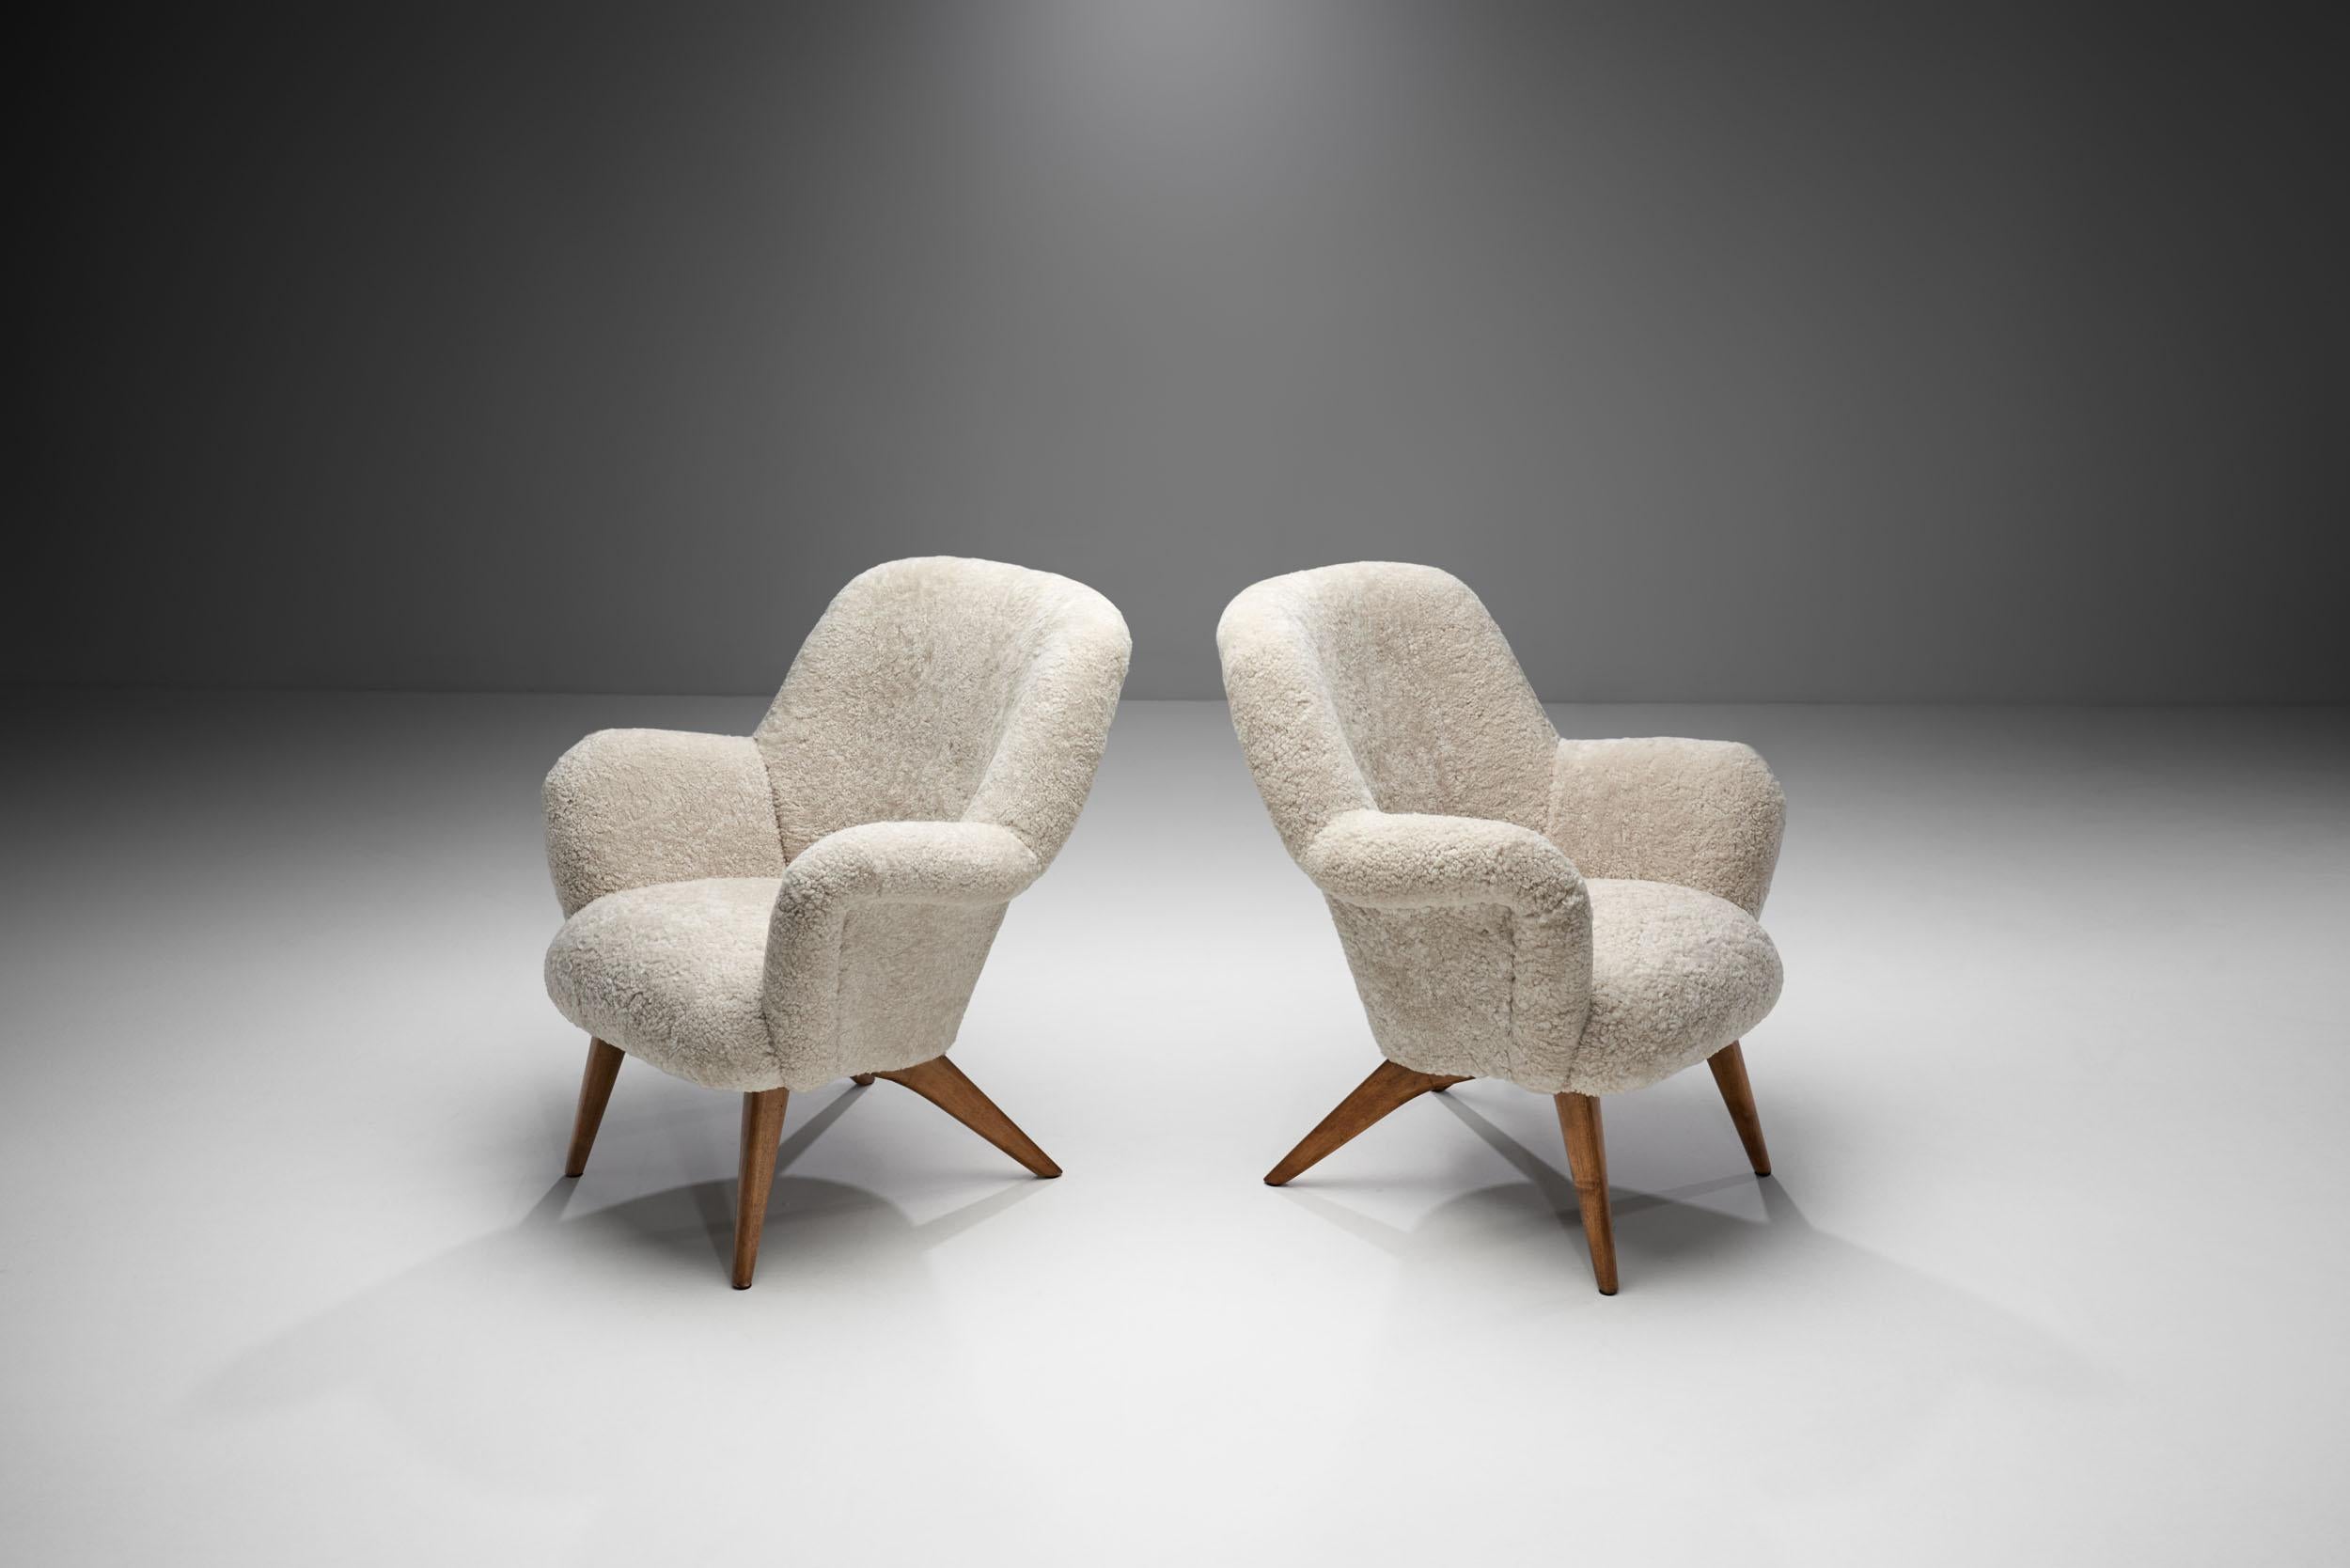 20th Century Pair of “Pedro” Armchairs by Carl Gustaf Hiort Af Ornäs, Finland 1950s For Sale